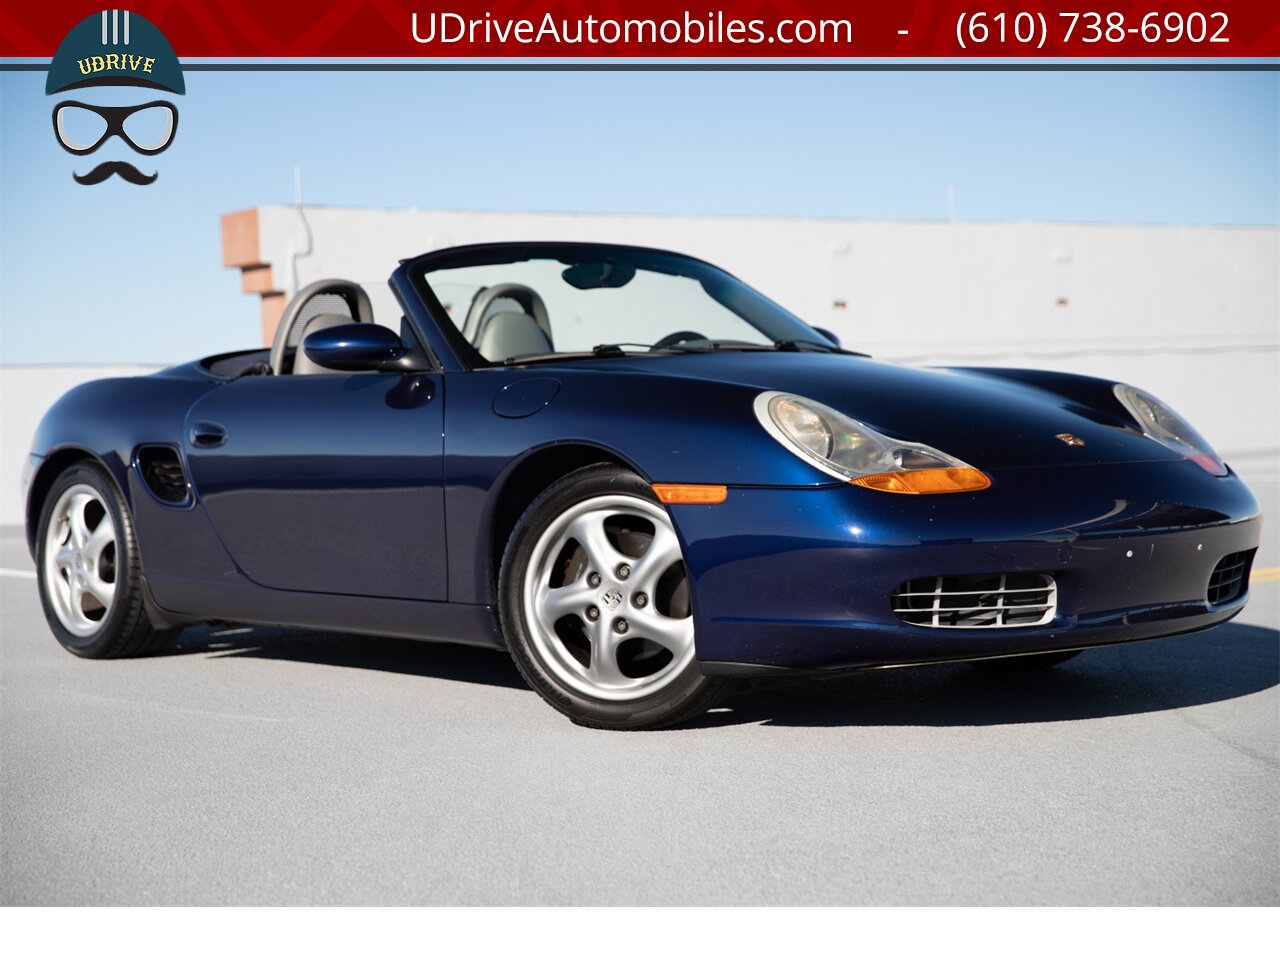 2001 Porsche Boxster 5 Speed Manual Detailed Service History  Same Owner for Last 18 Years Hard Top Included - Photo 3 - West Chester, PA 19382